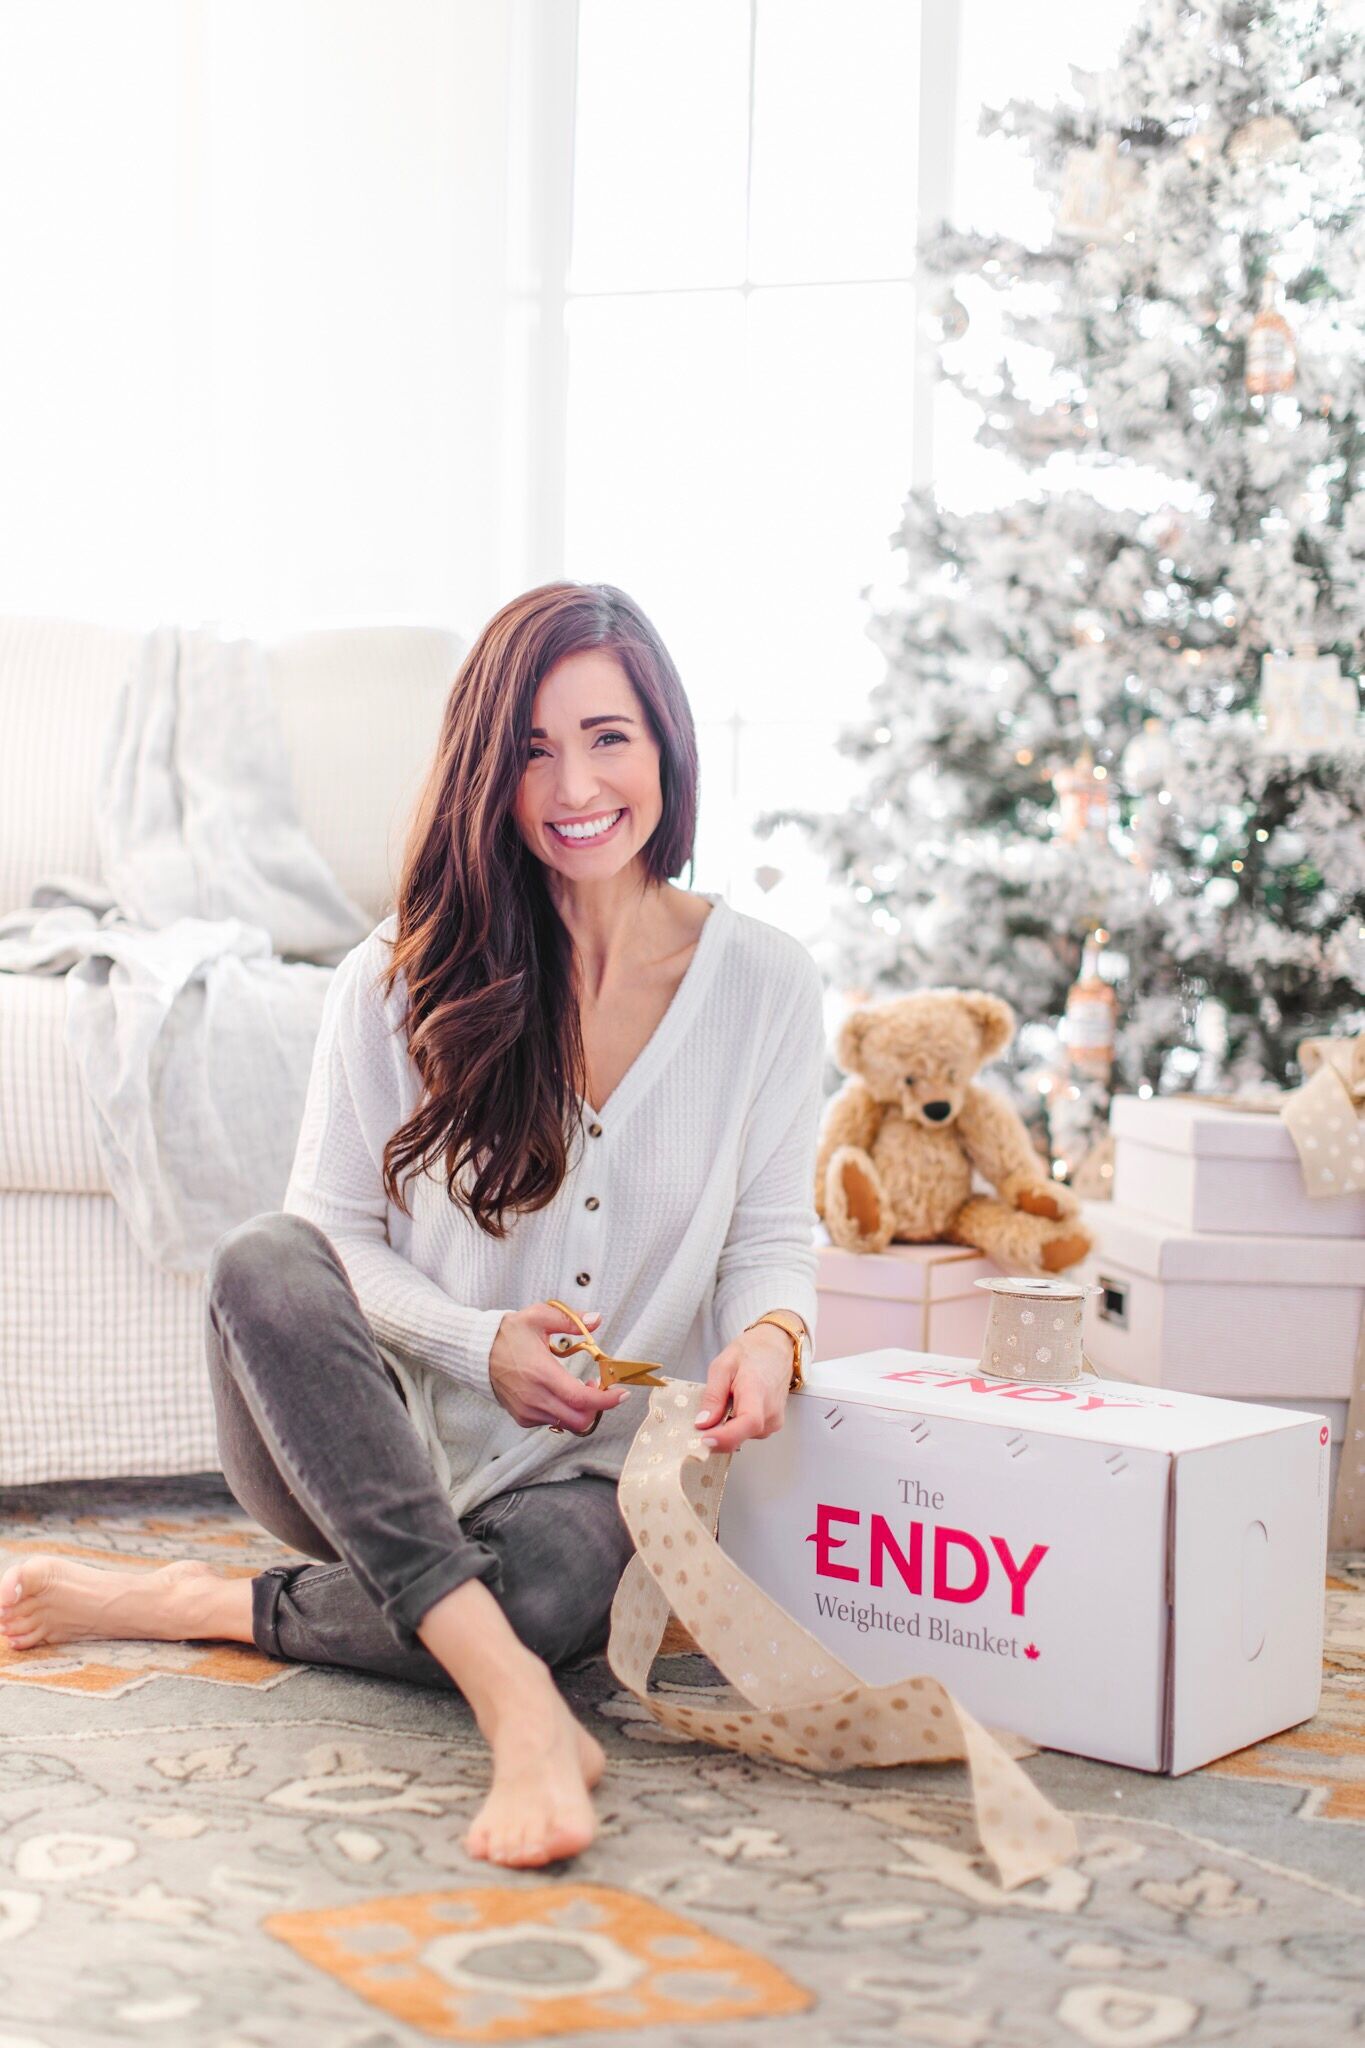 Endy bed giveaway